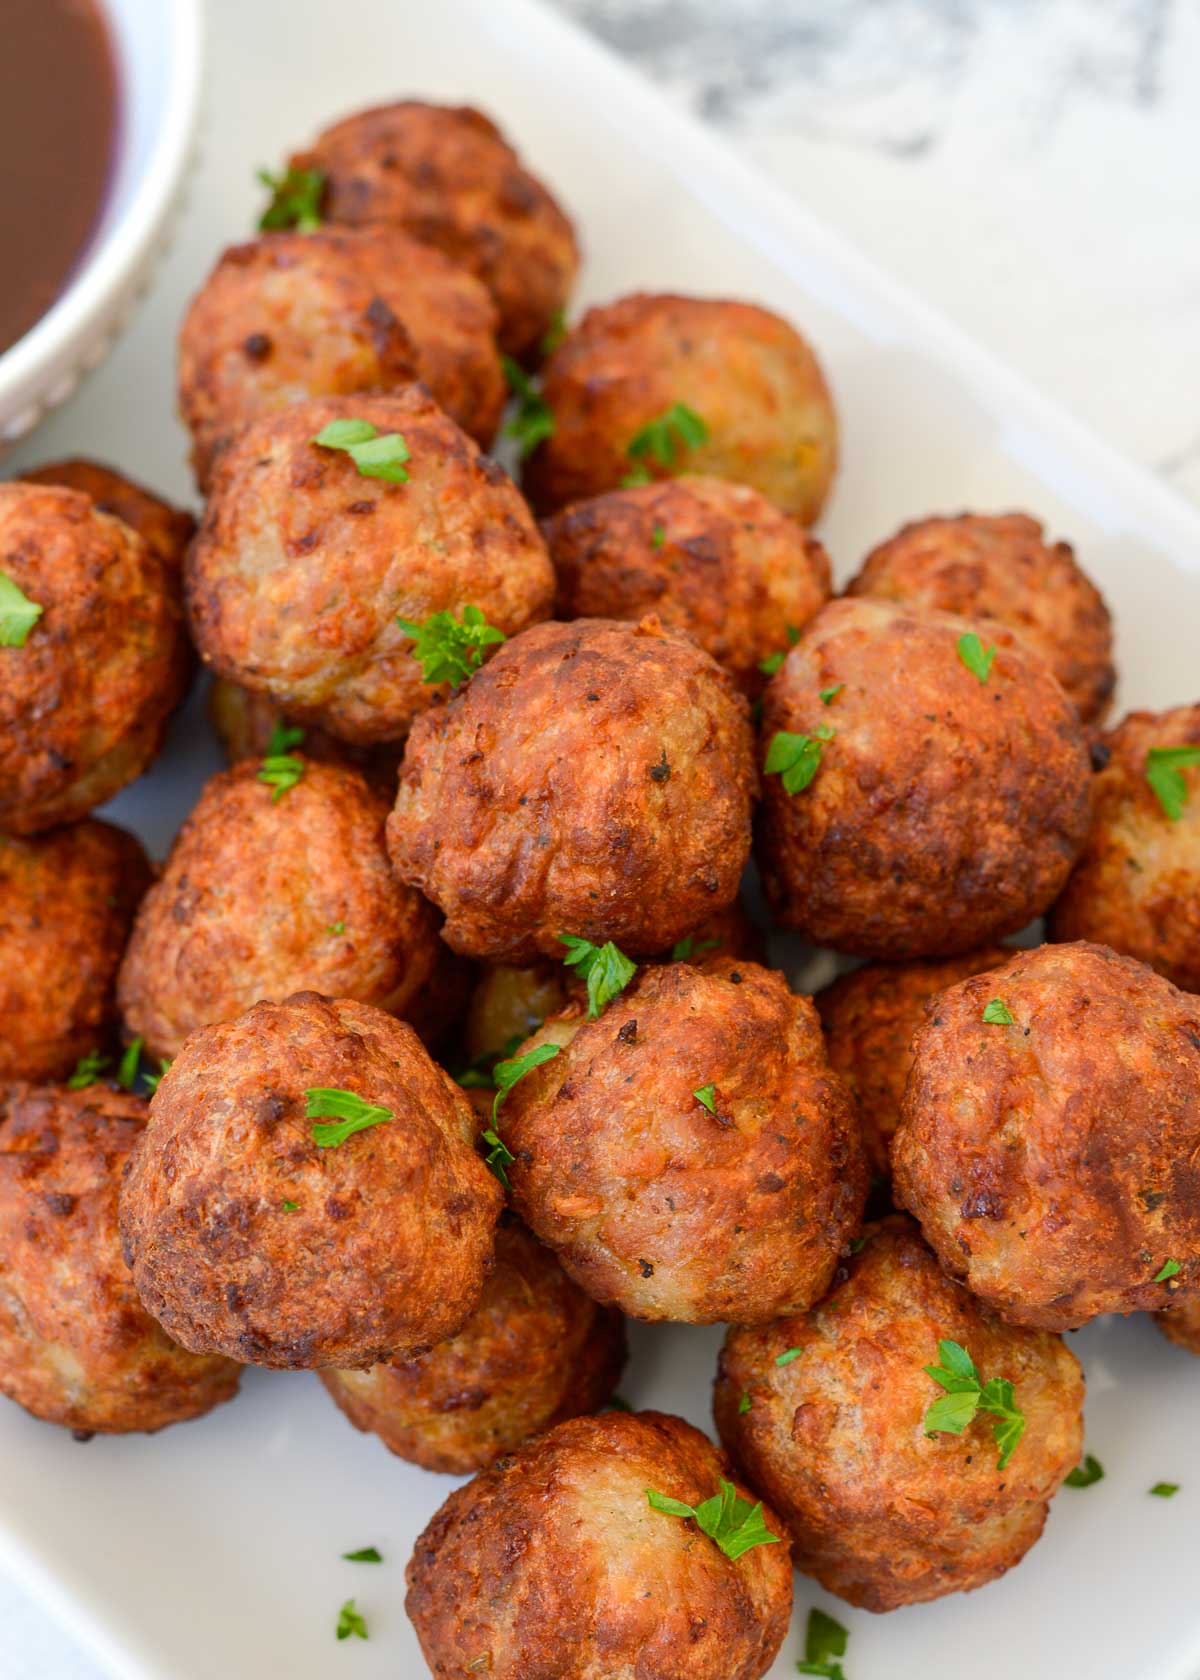 Whether you serve them covered in sauce or plain and ready to dip, air fryer meatballs are a juicy, delicious side dish you can make quickly!